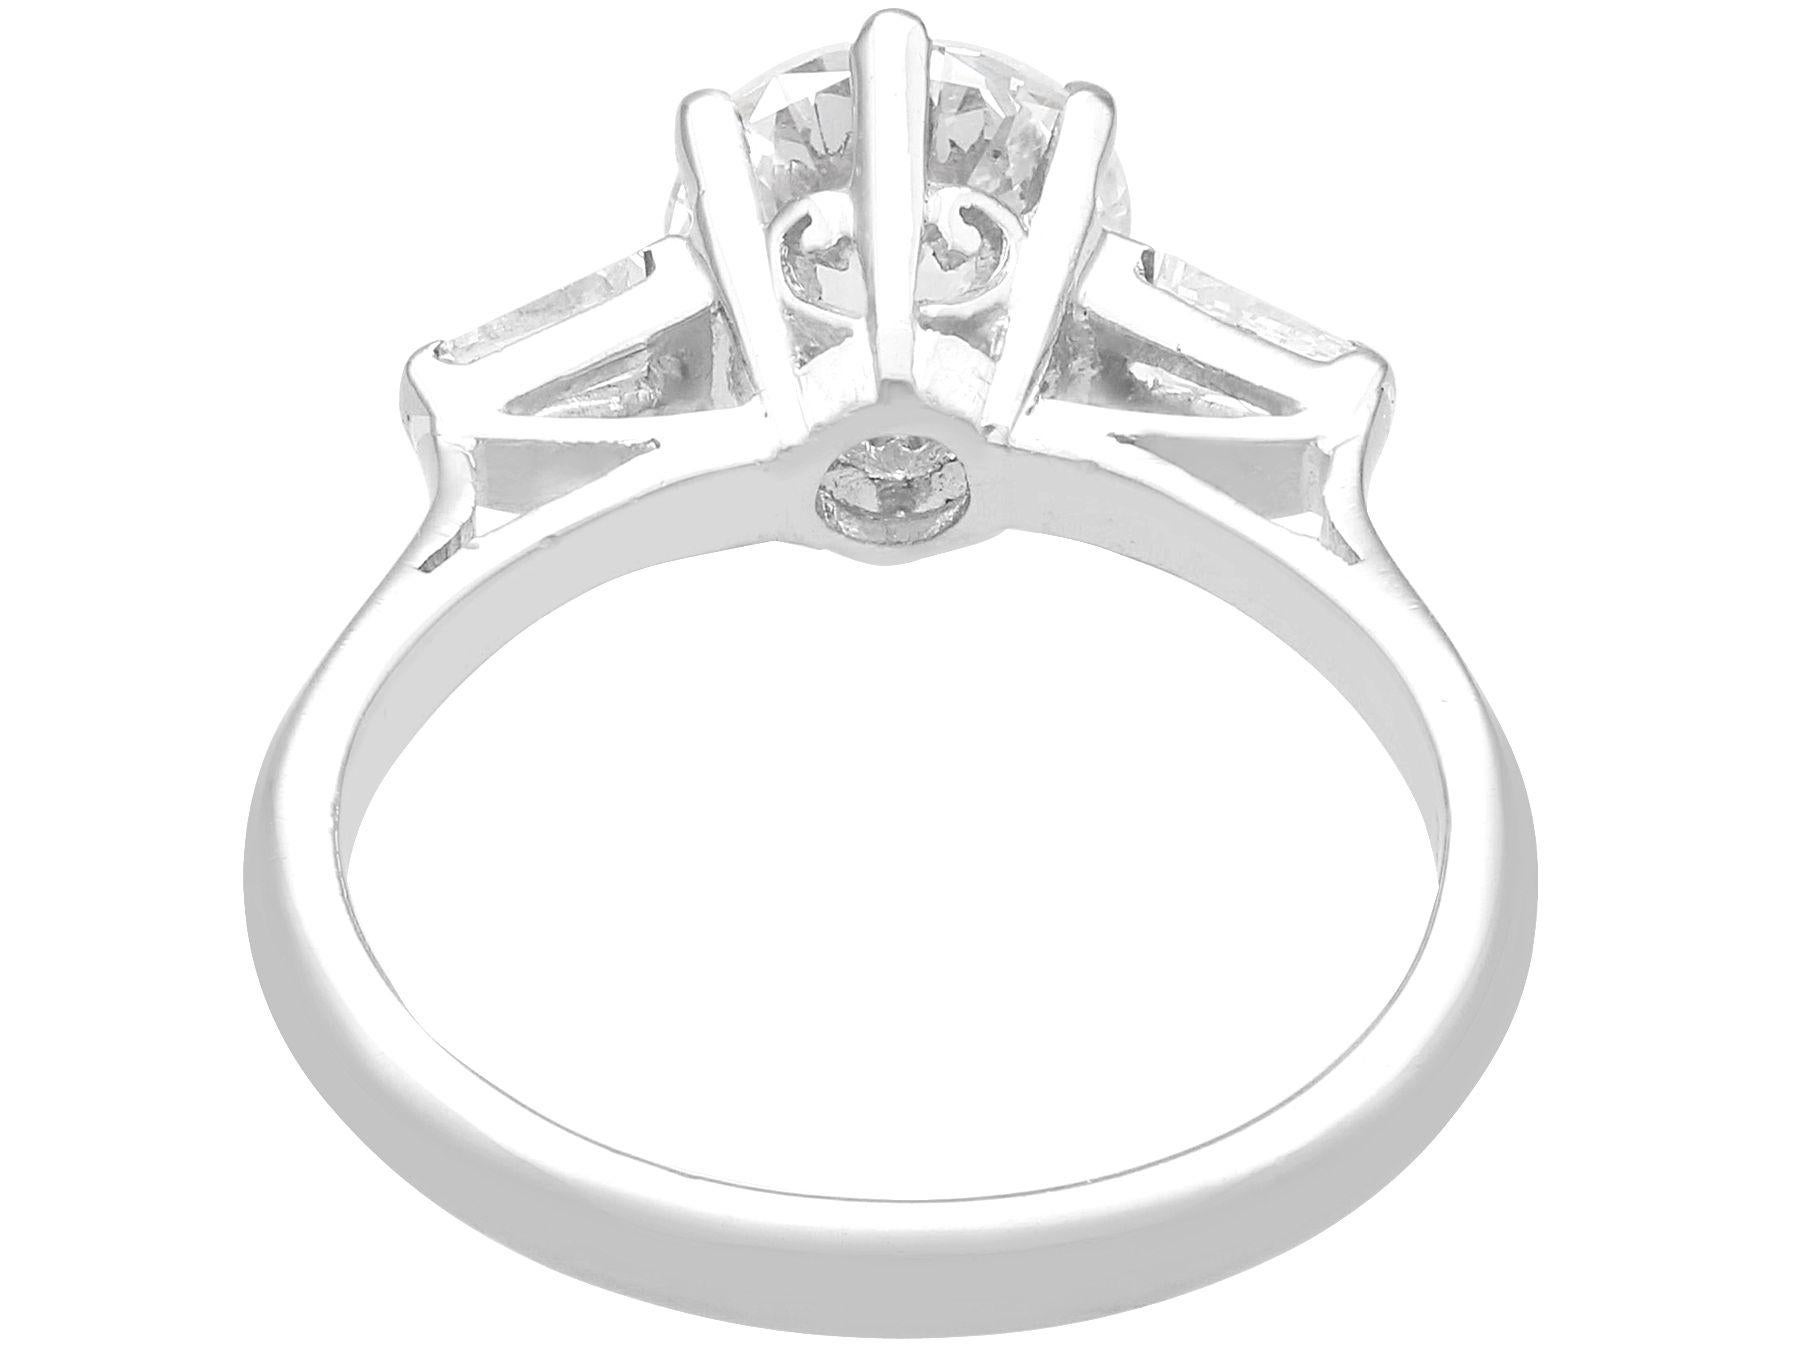 Round Cut Antique 1.62 Carat Diamond and 18k White Gold Solitaire Ring, circa 1935 For Sale